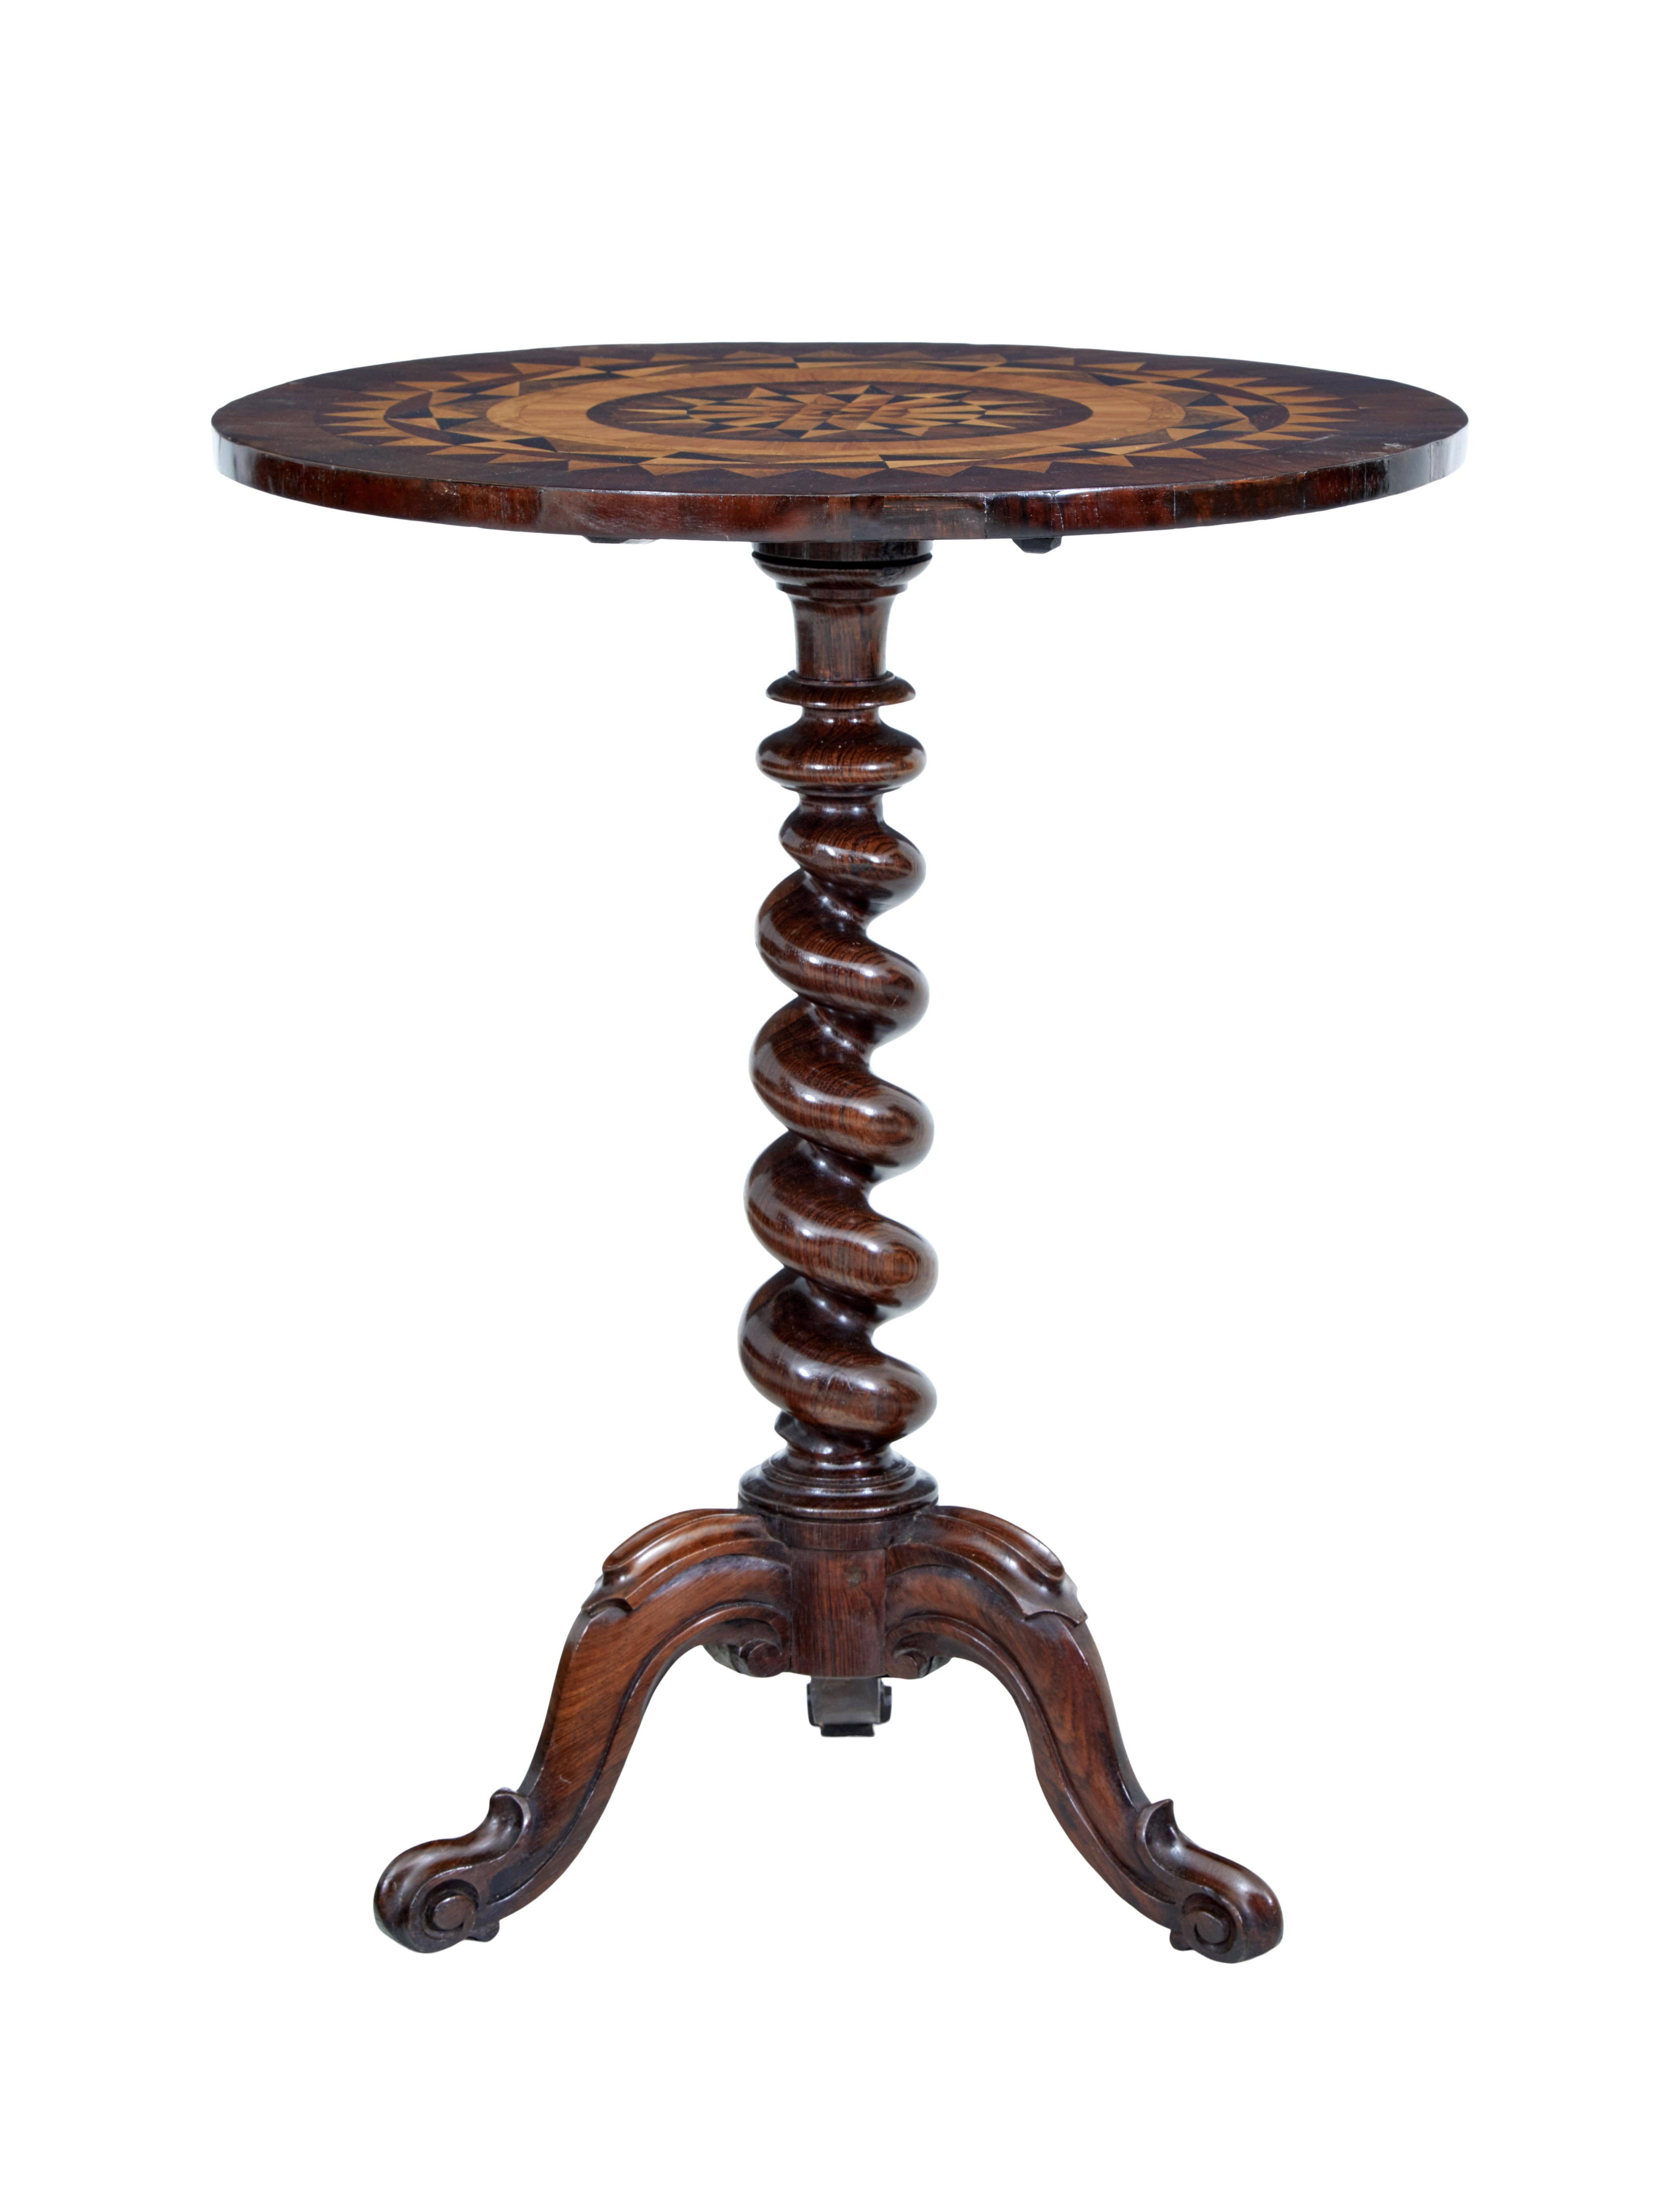 Hand-Crafted Early Victorian 19th Century Walnut Inlaid Tilt Top Occasional Table